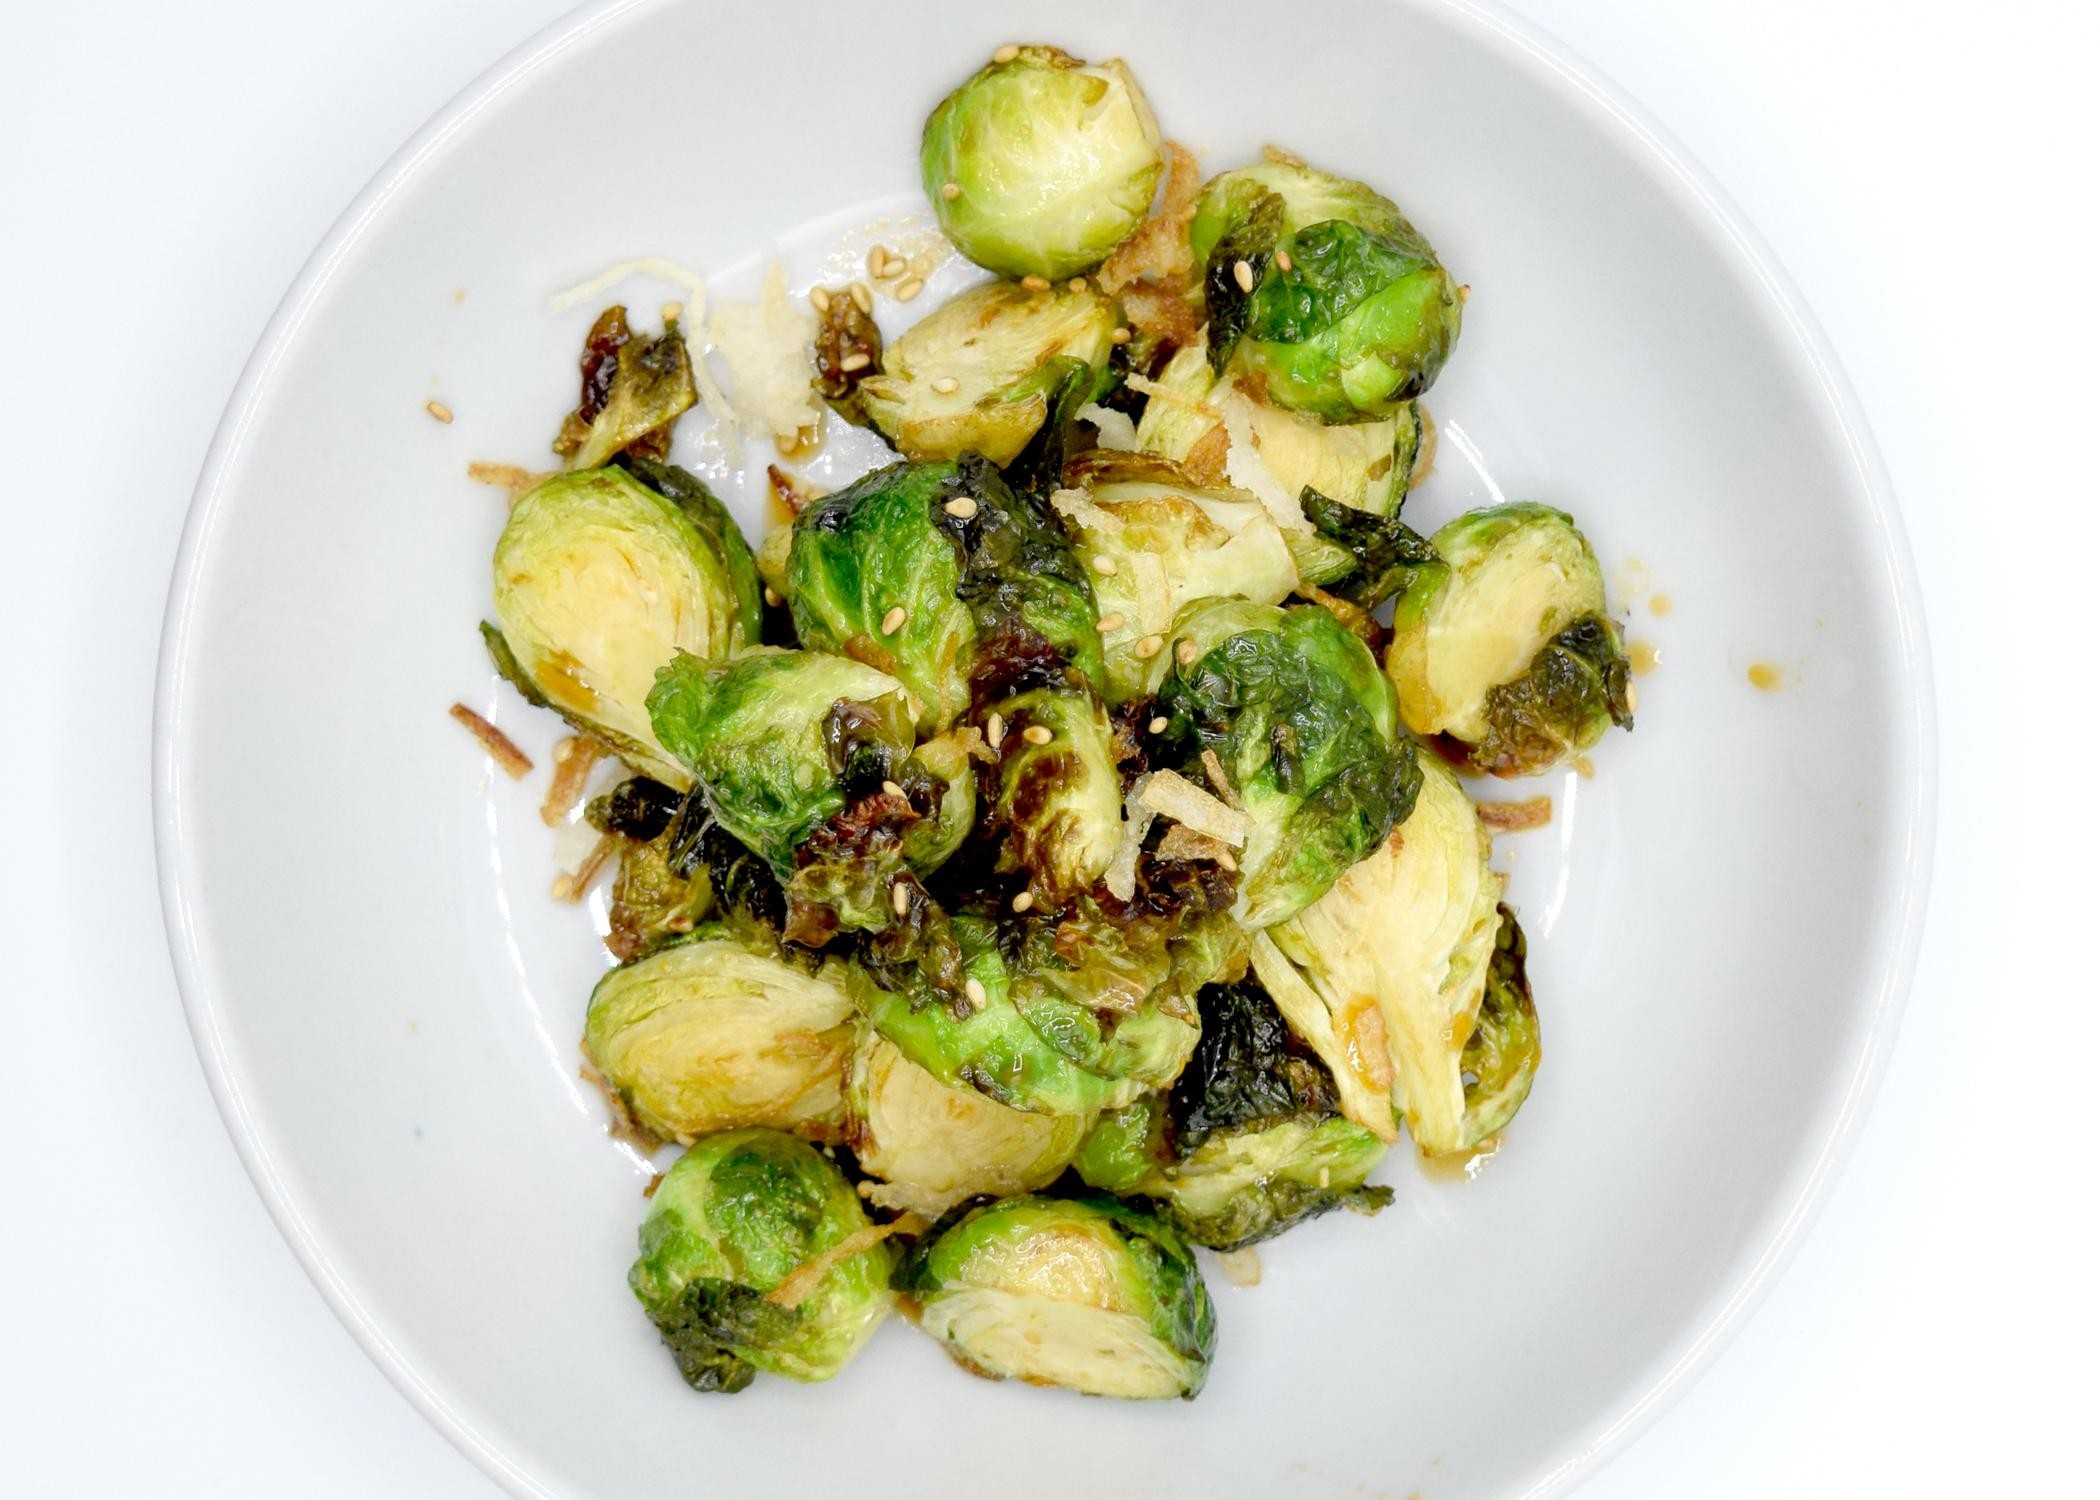 Brussel Sprout